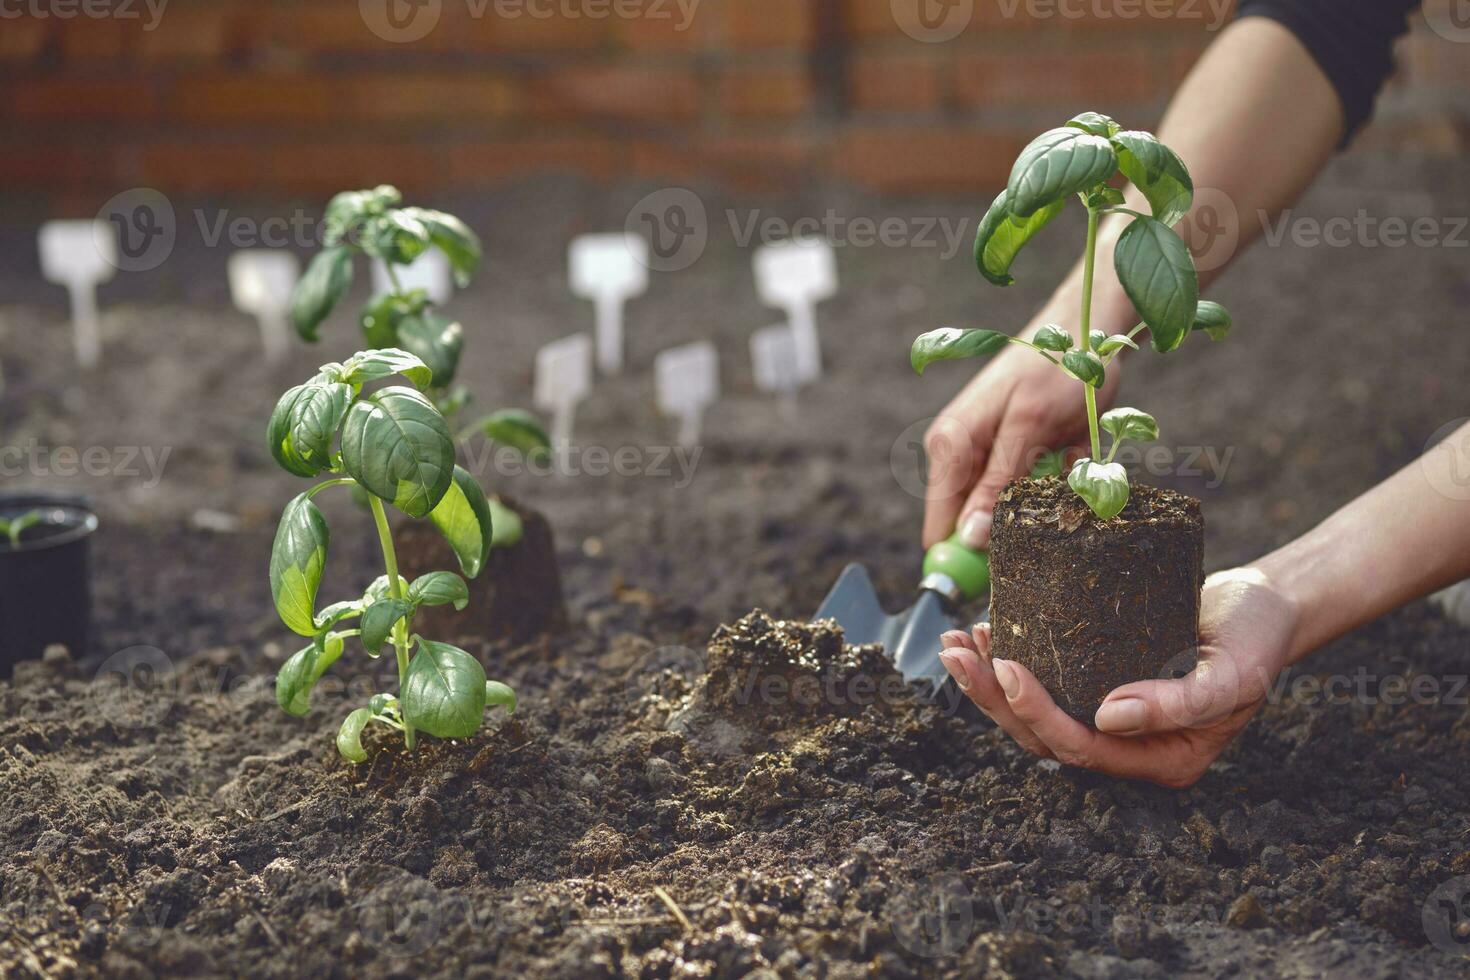 Hand of unknown gardener is using small garden shovel and holding young green basil seedling or plant in soil. Sunlight, ground. Close-up photo